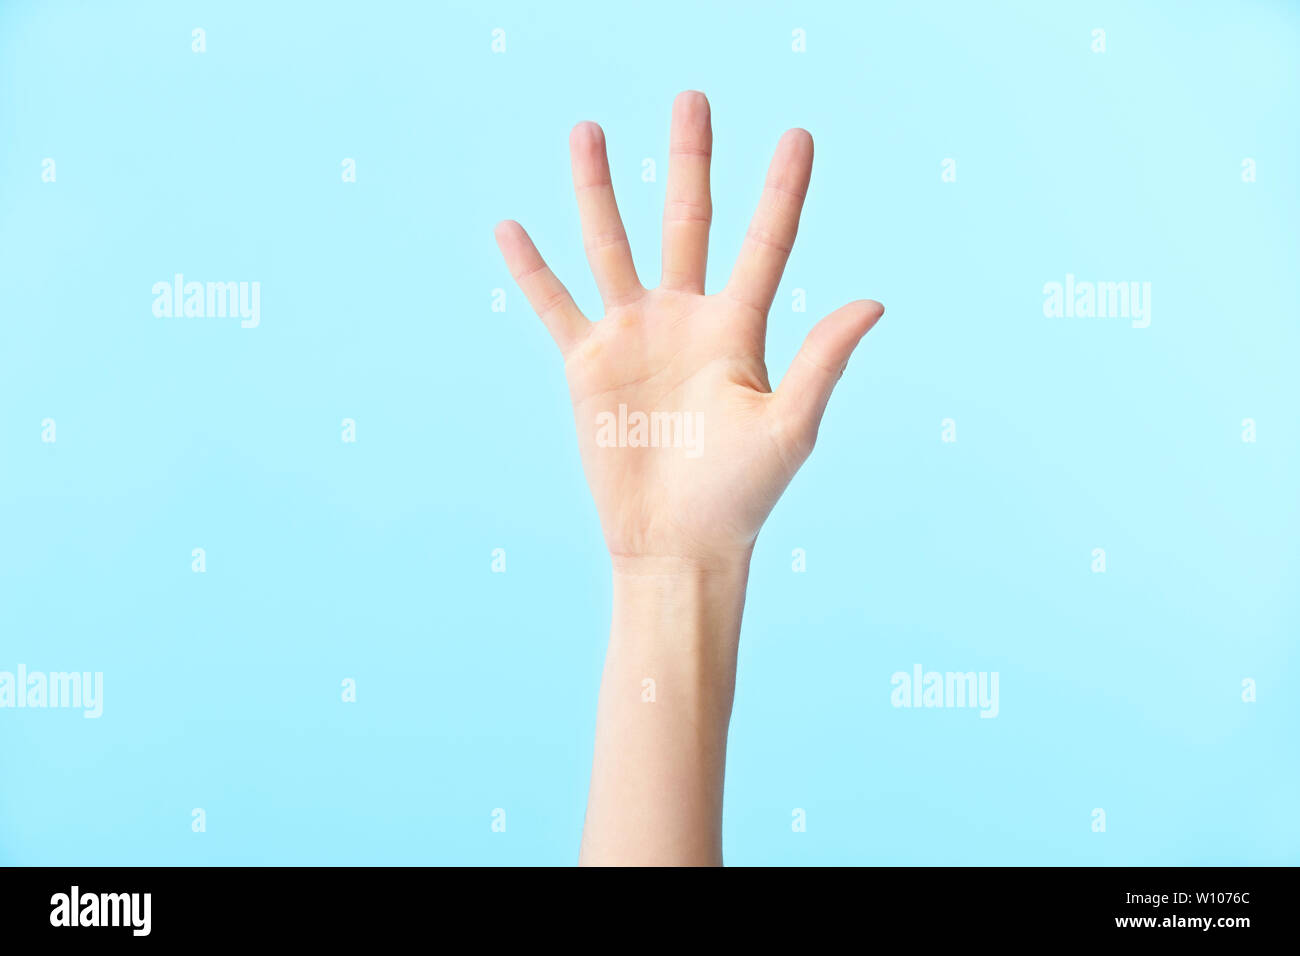 human hand showing number five, isolated on blue background Stock Photo